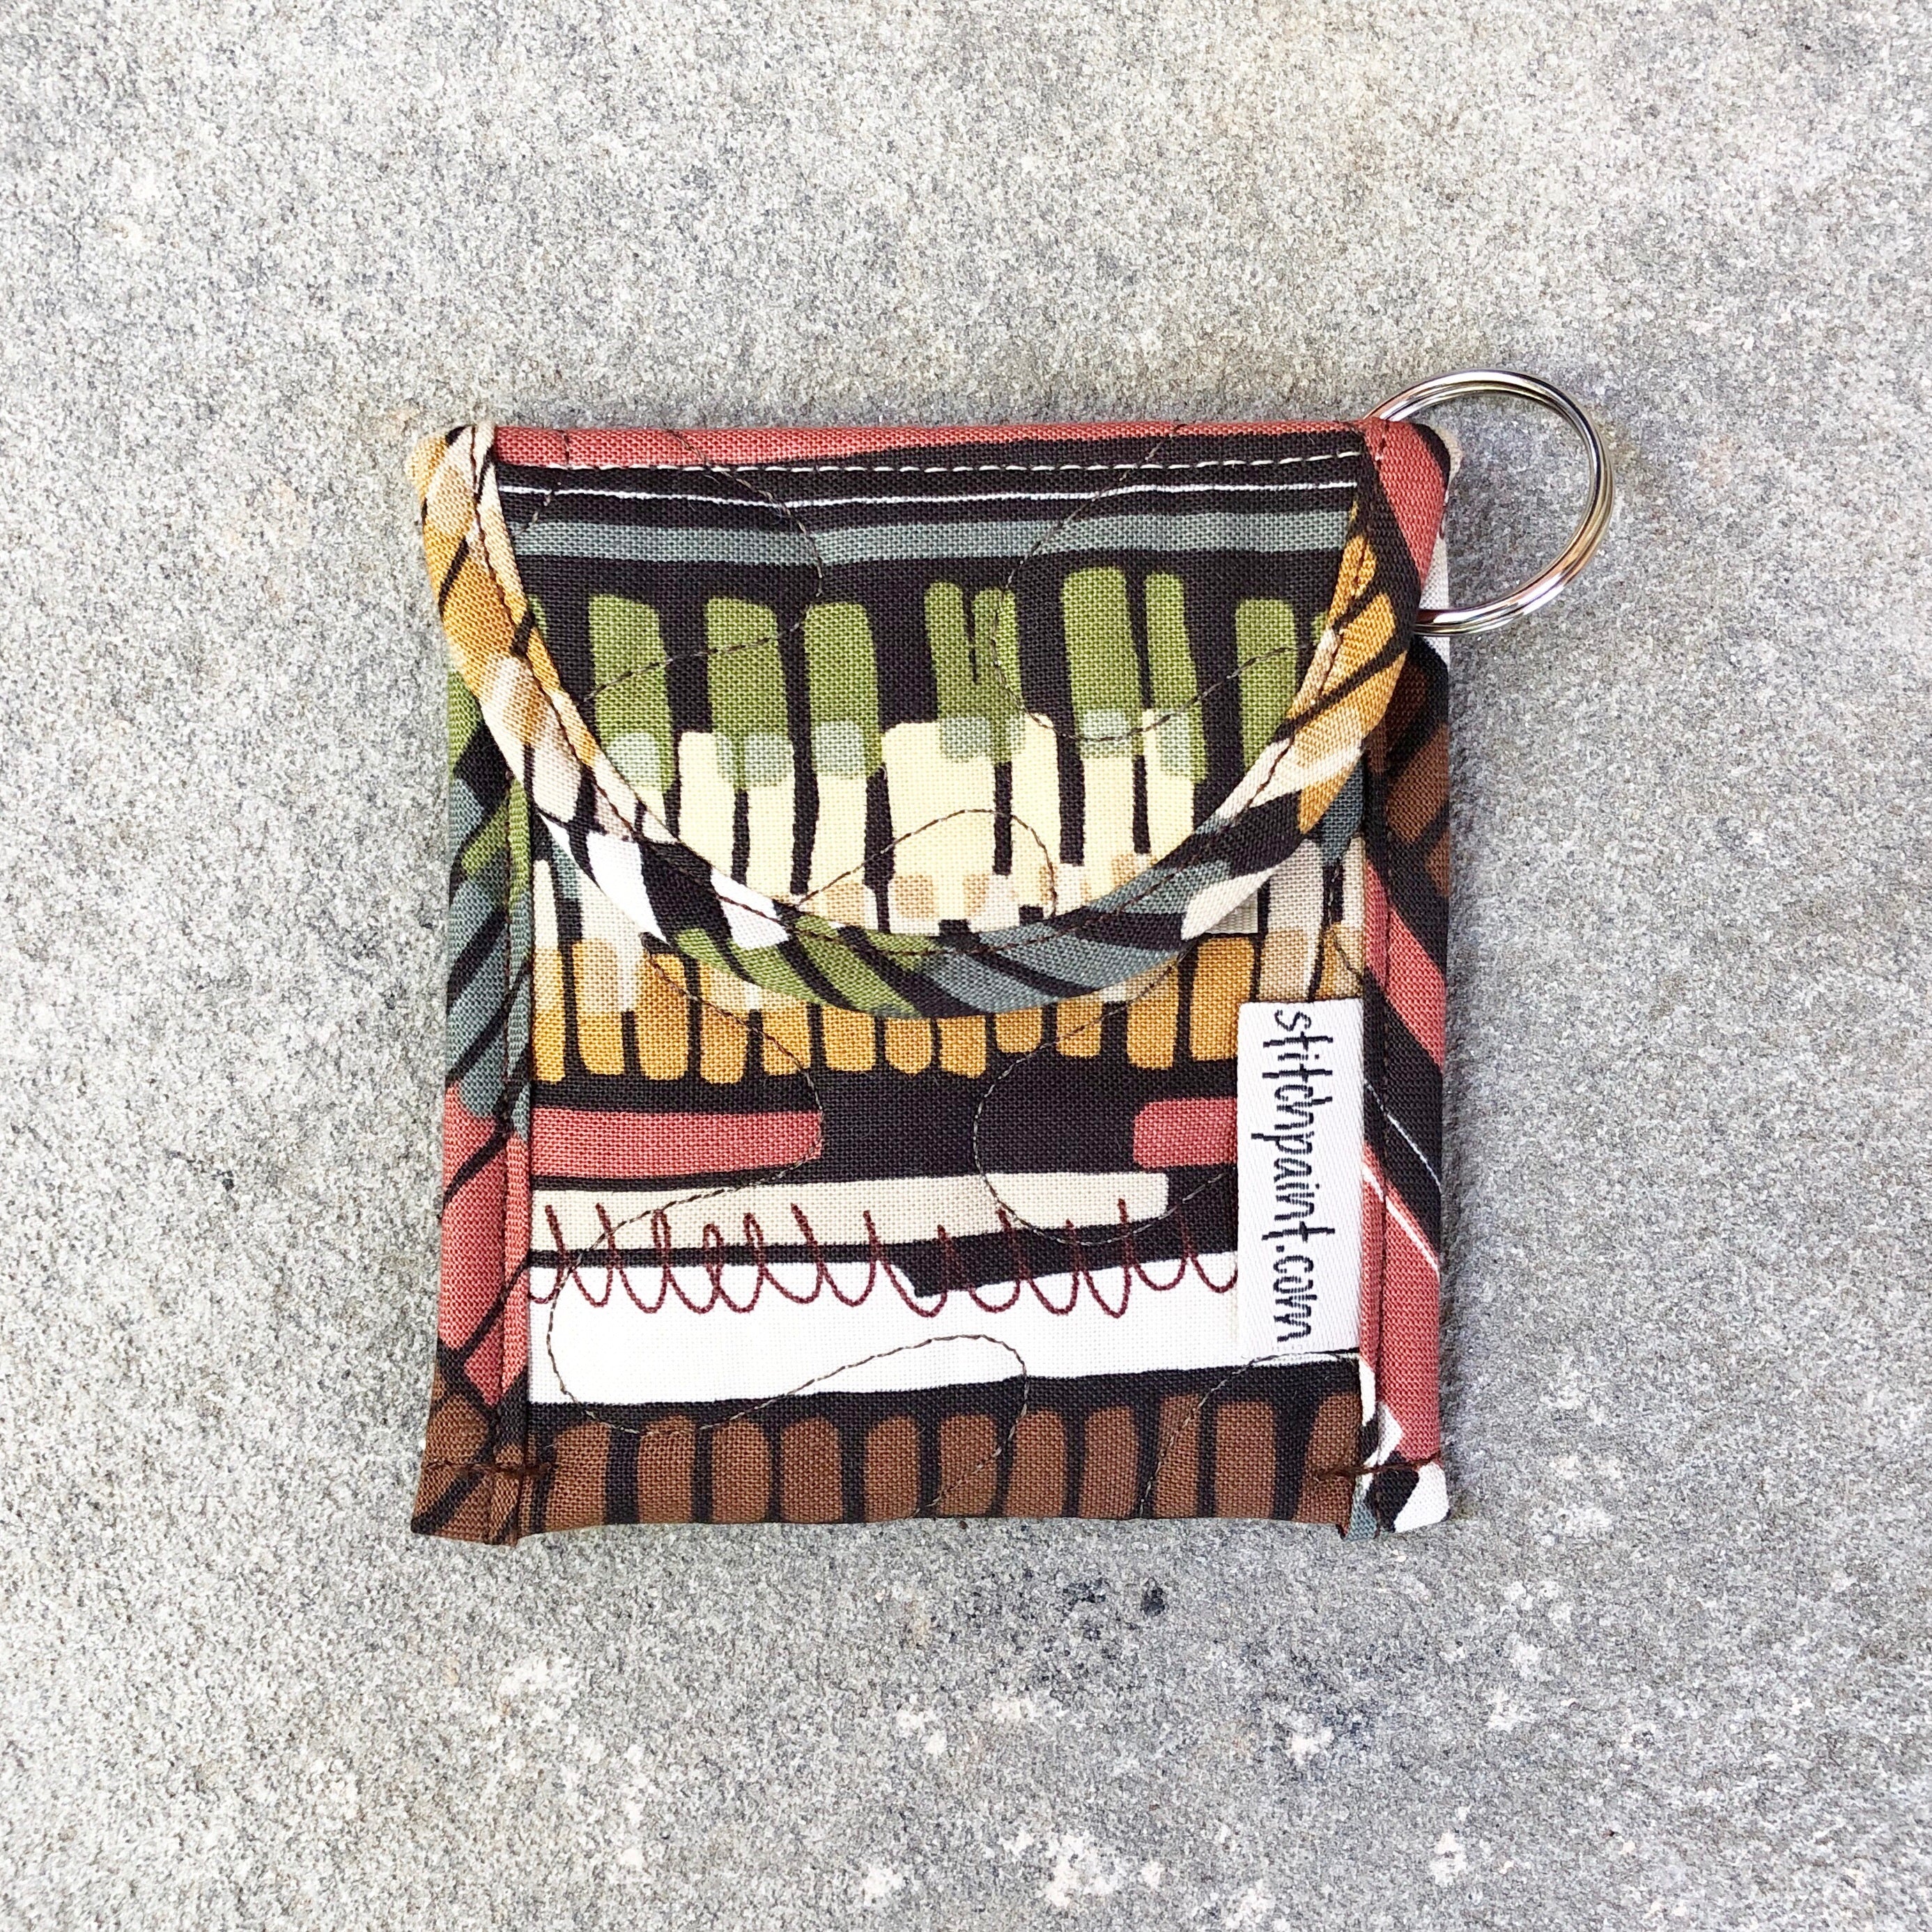 Credit Card Fob | Keychain Card Wallet | Stitchpaint | Spice